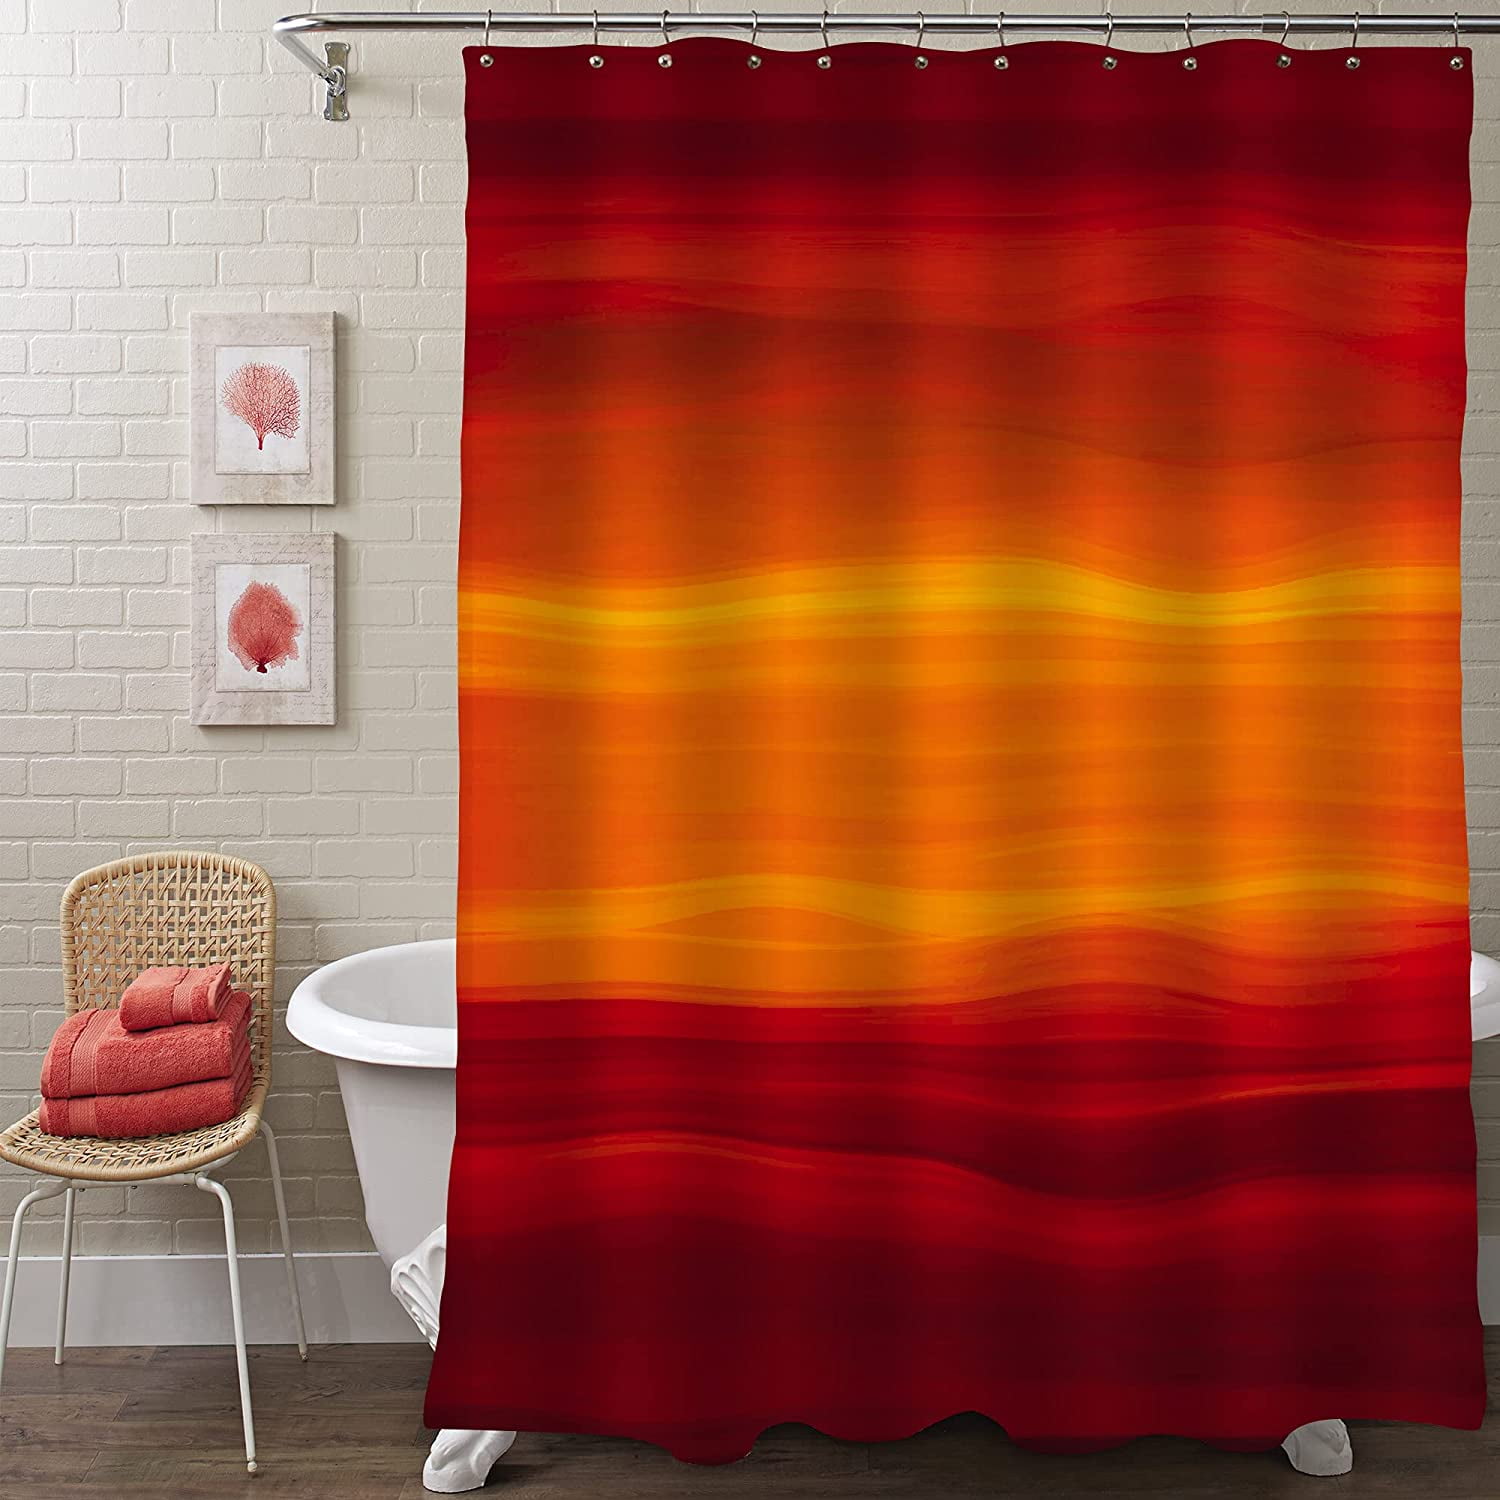 Small Stall Shower Curtain Set 36 x 72 Black Orange Ombre Ocean 